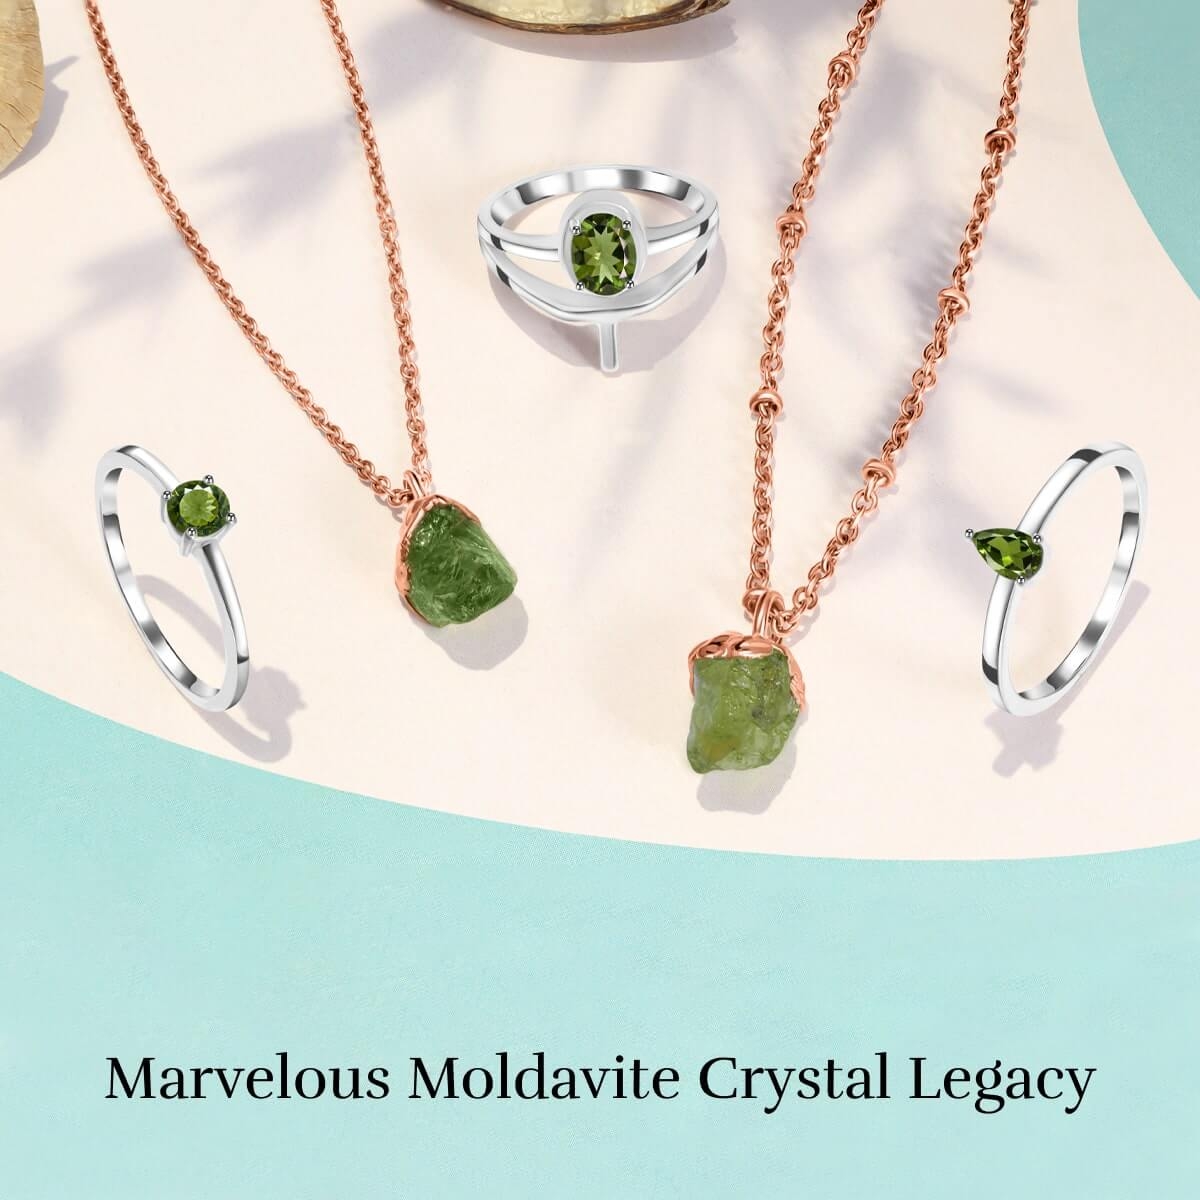 The Moldavite Crystal - Meaning, Healing Properties, Value, Zodiac Signs, Uses and Price